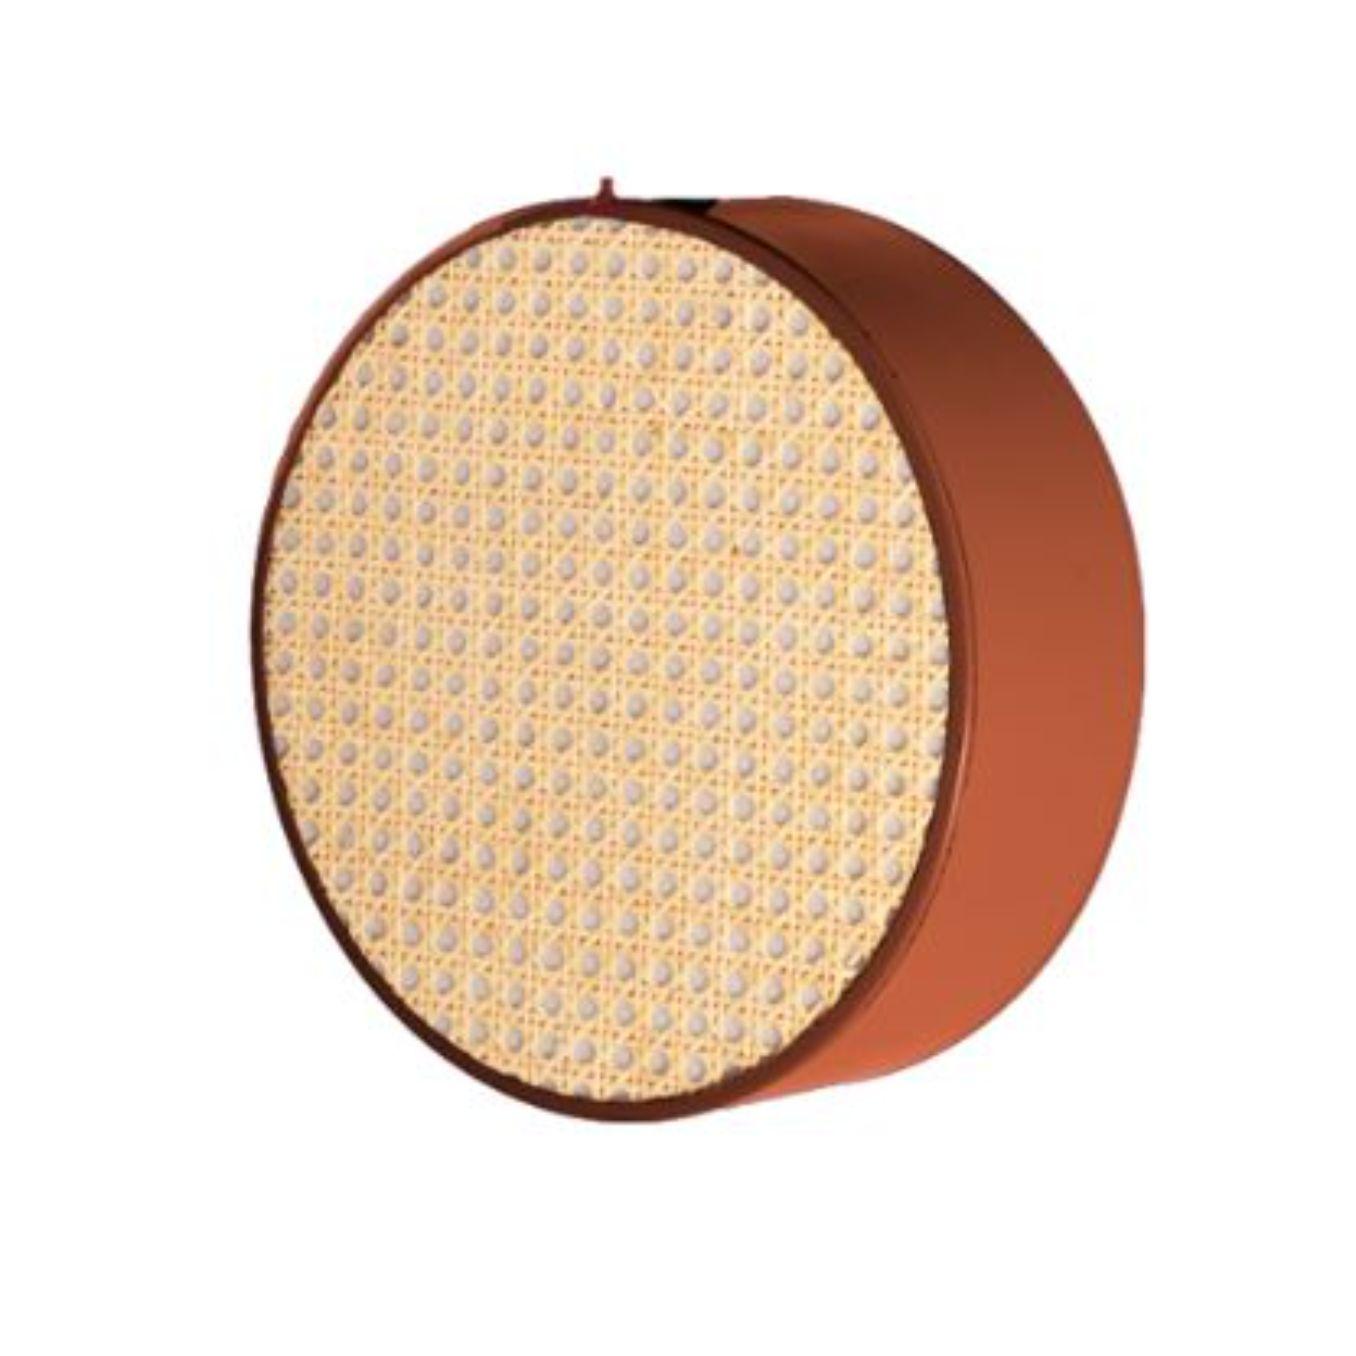 30 Monaco wall I lamp by Dooq
Dimensions: W 30 x D 30 x H 9 cm
Materials: lacquered metal, rattan, terrazzo.
Also available in different dimensions.

Information:
230V/50Hz
2 x max. G9
4W LED

120V/60Hz
2 x max. G9
4W LED

Cable: 59”/1,5m

All our